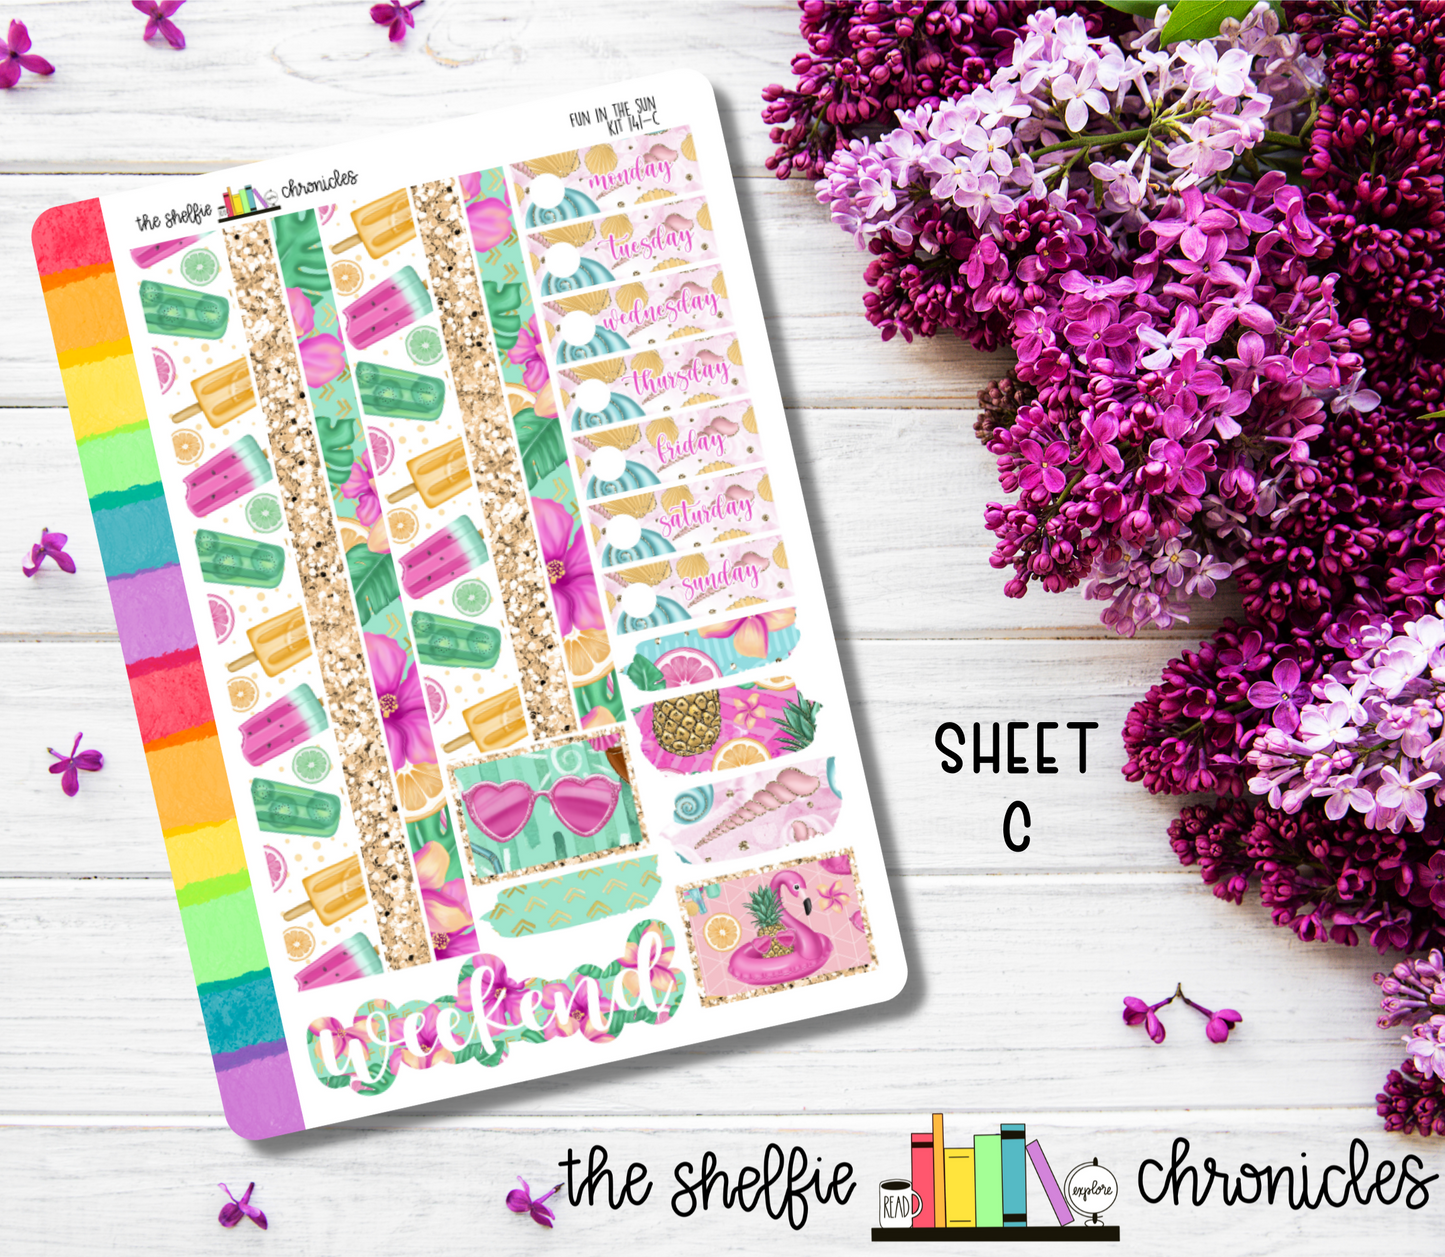 Kit 141 - Fun In The Sun - Die Cut Stickers - Repositionable Paper - Made To Fit 7x9 Planners